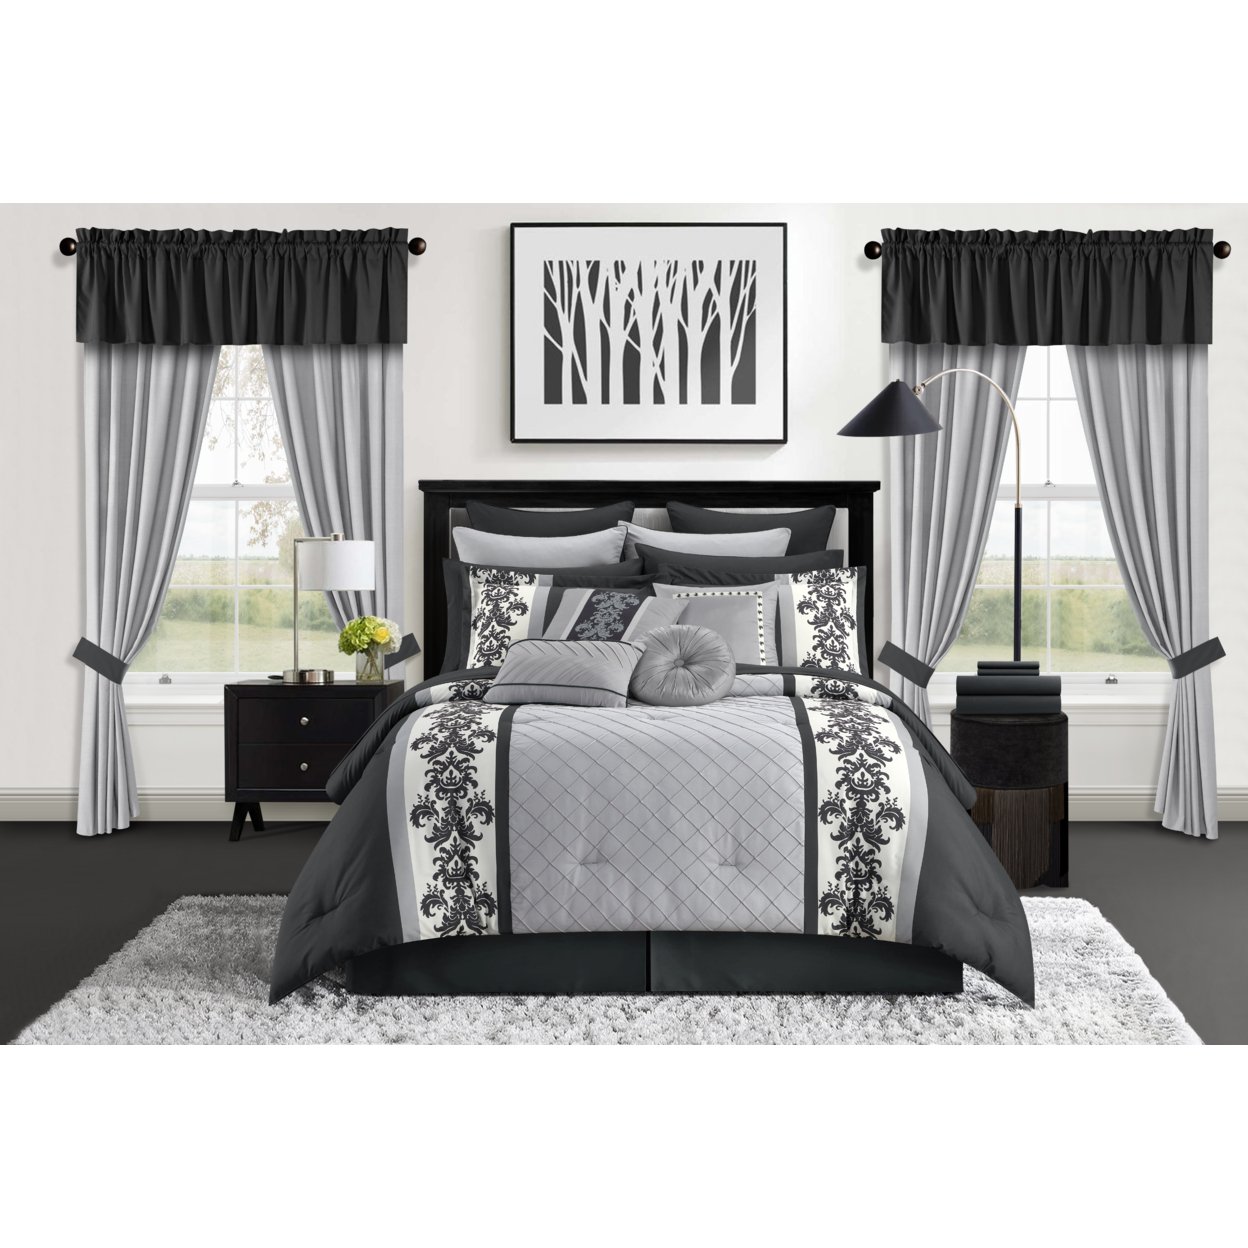 Dyllan 30 Piece Comforter Set Color Block Diamond Stitched Printed Scroll Bed In A Bag Bedding - Grey, King